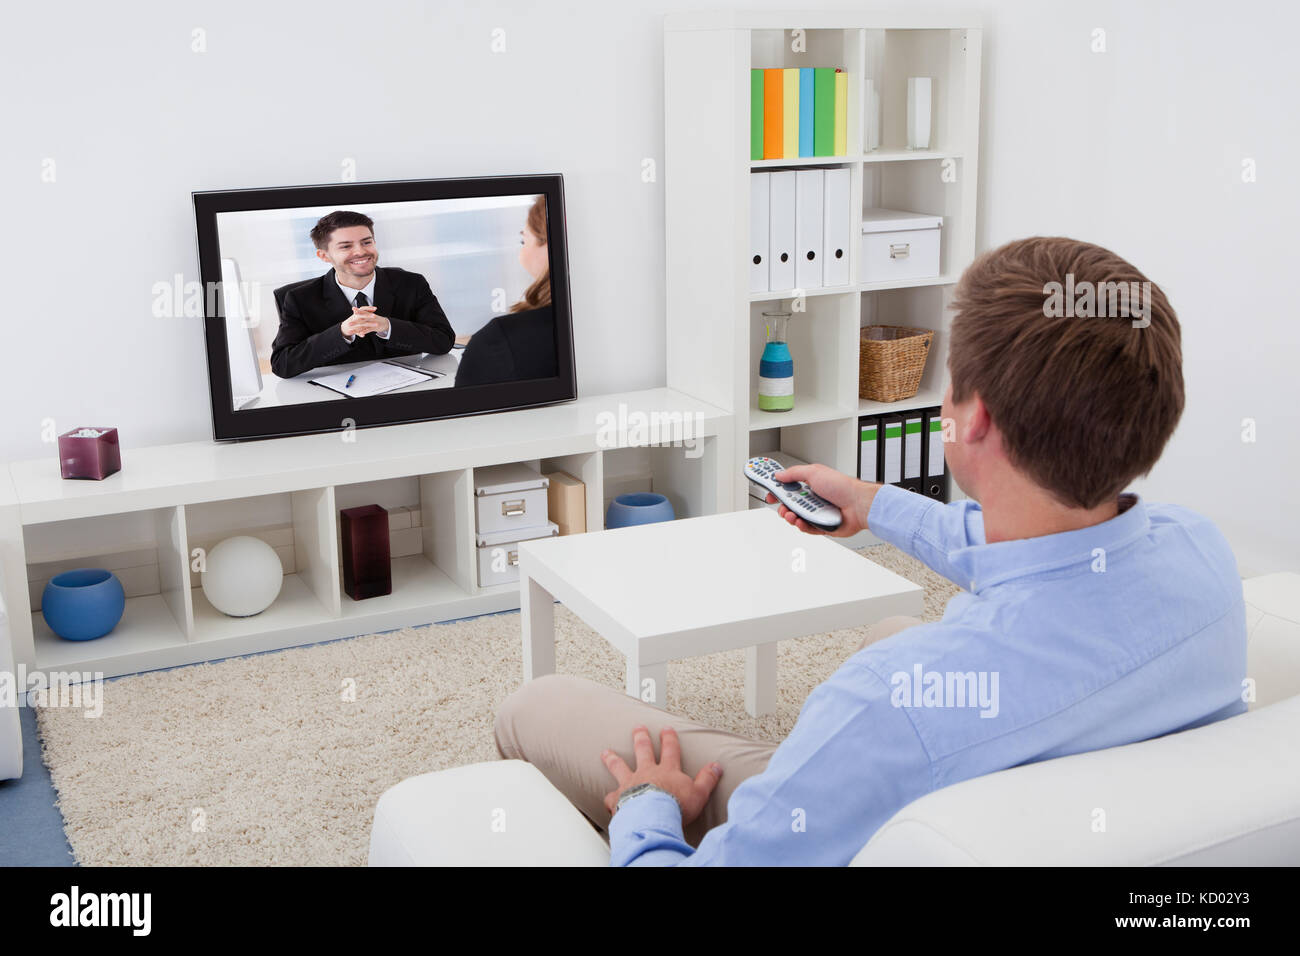 Rear View Of A Man Sitting On Couch Watching Television Stock Photo